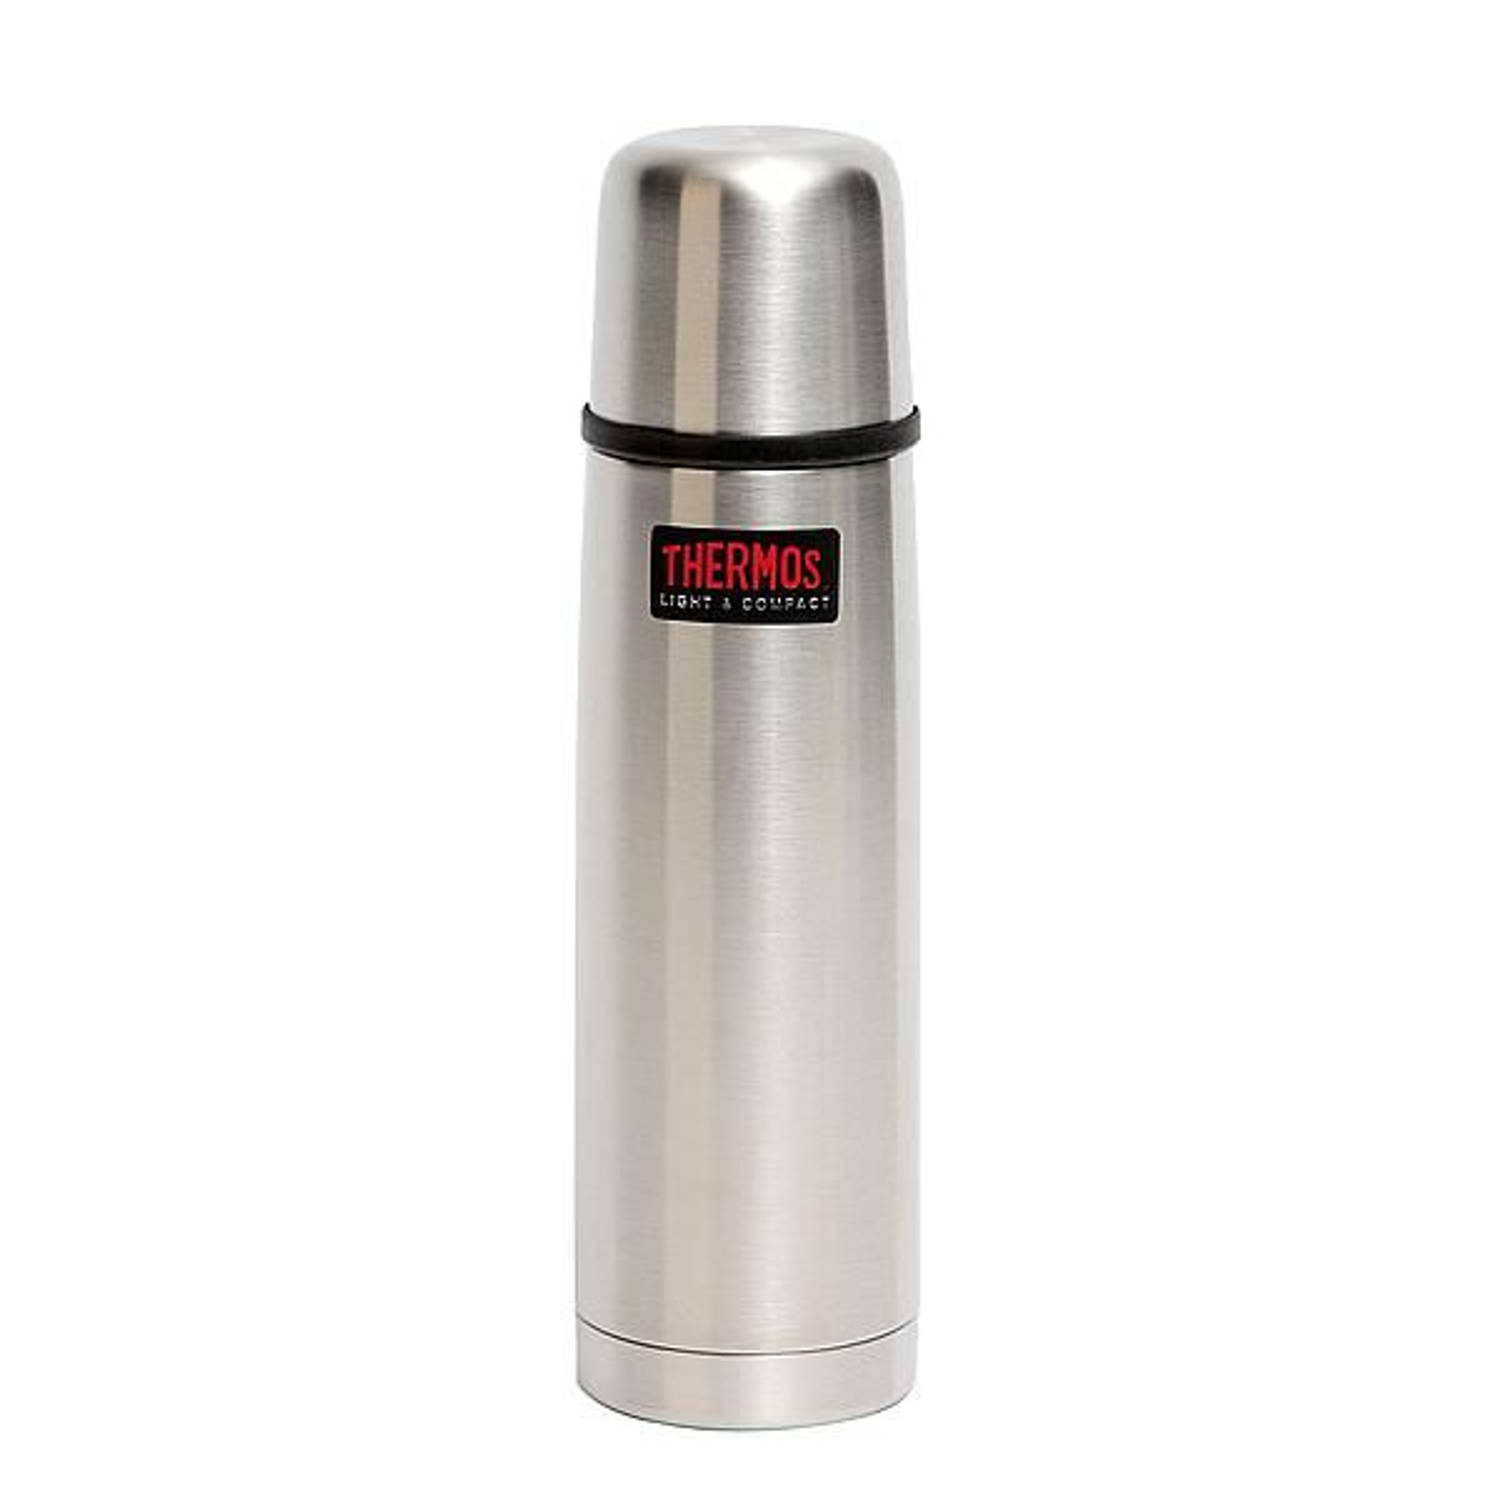 Thermos Light&compact Thermosfles - 0,5 Liter